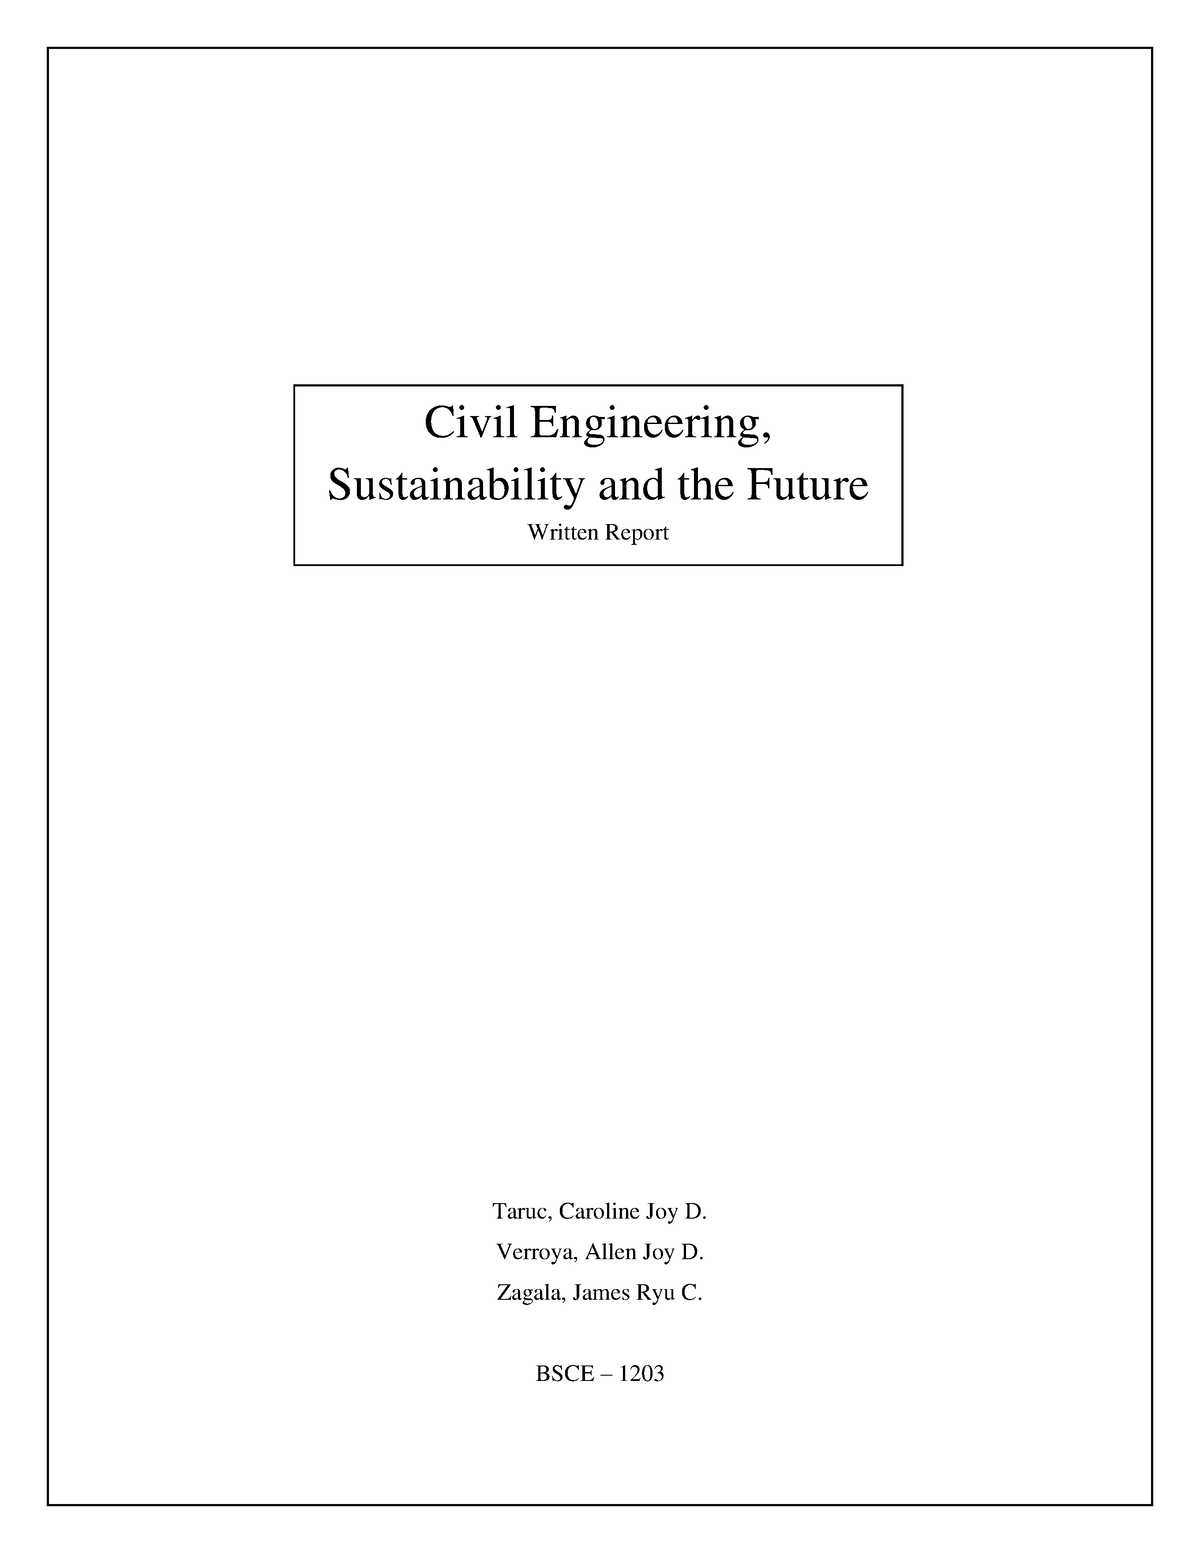 civil engineering sustainability and the future essay